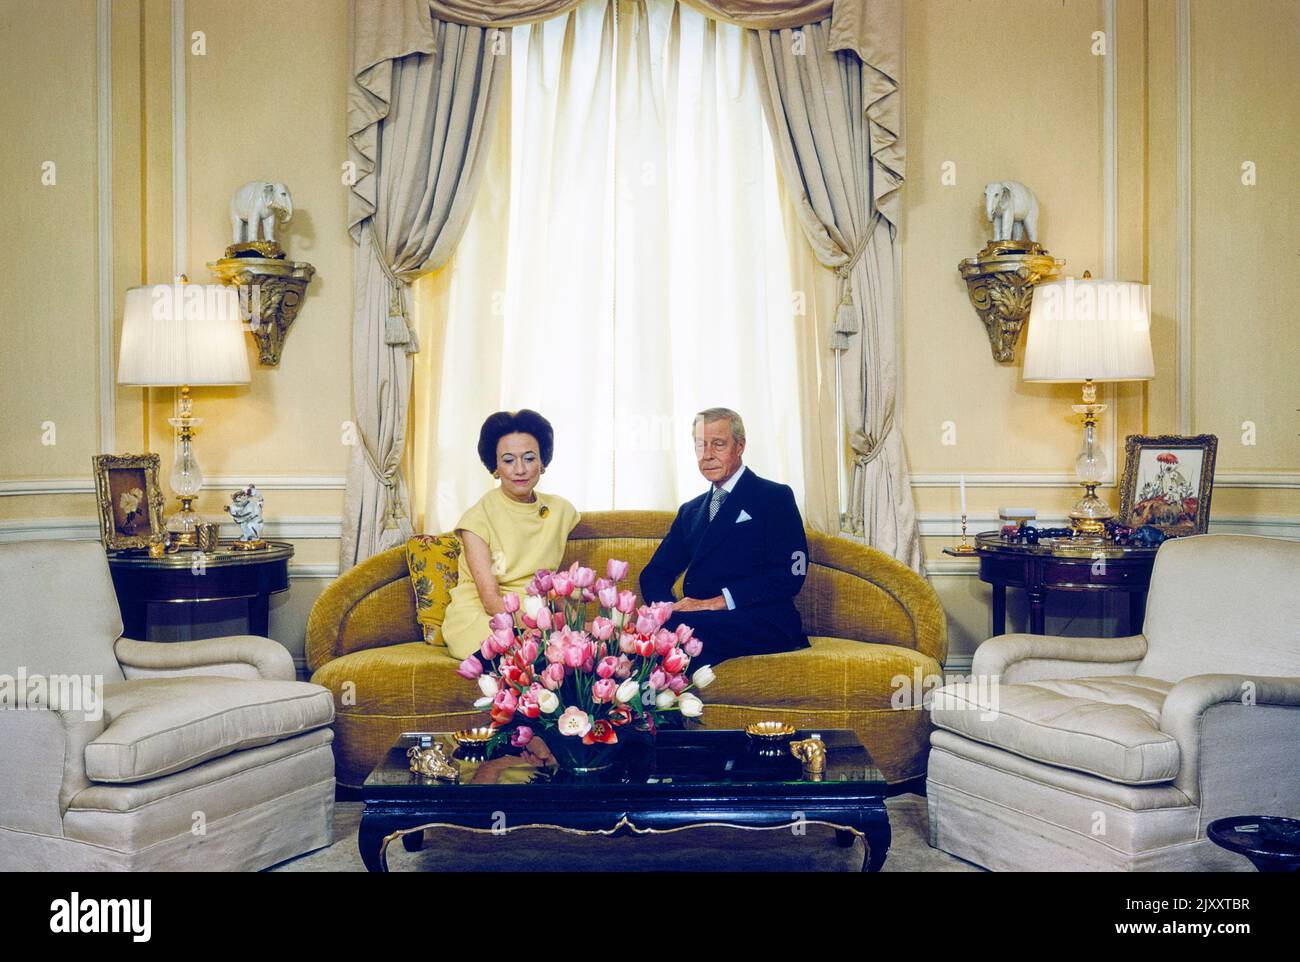 Duchess of Windsor, Wallis Simpson and Duke of Windsor, formerly King Edward III of United Kingdom and Dominions of British Empire, seated Portrait, Waldorf Astoria Hotel, New York City, New York, USA, Toni Frissell Collection, May 1966 Stock Photo